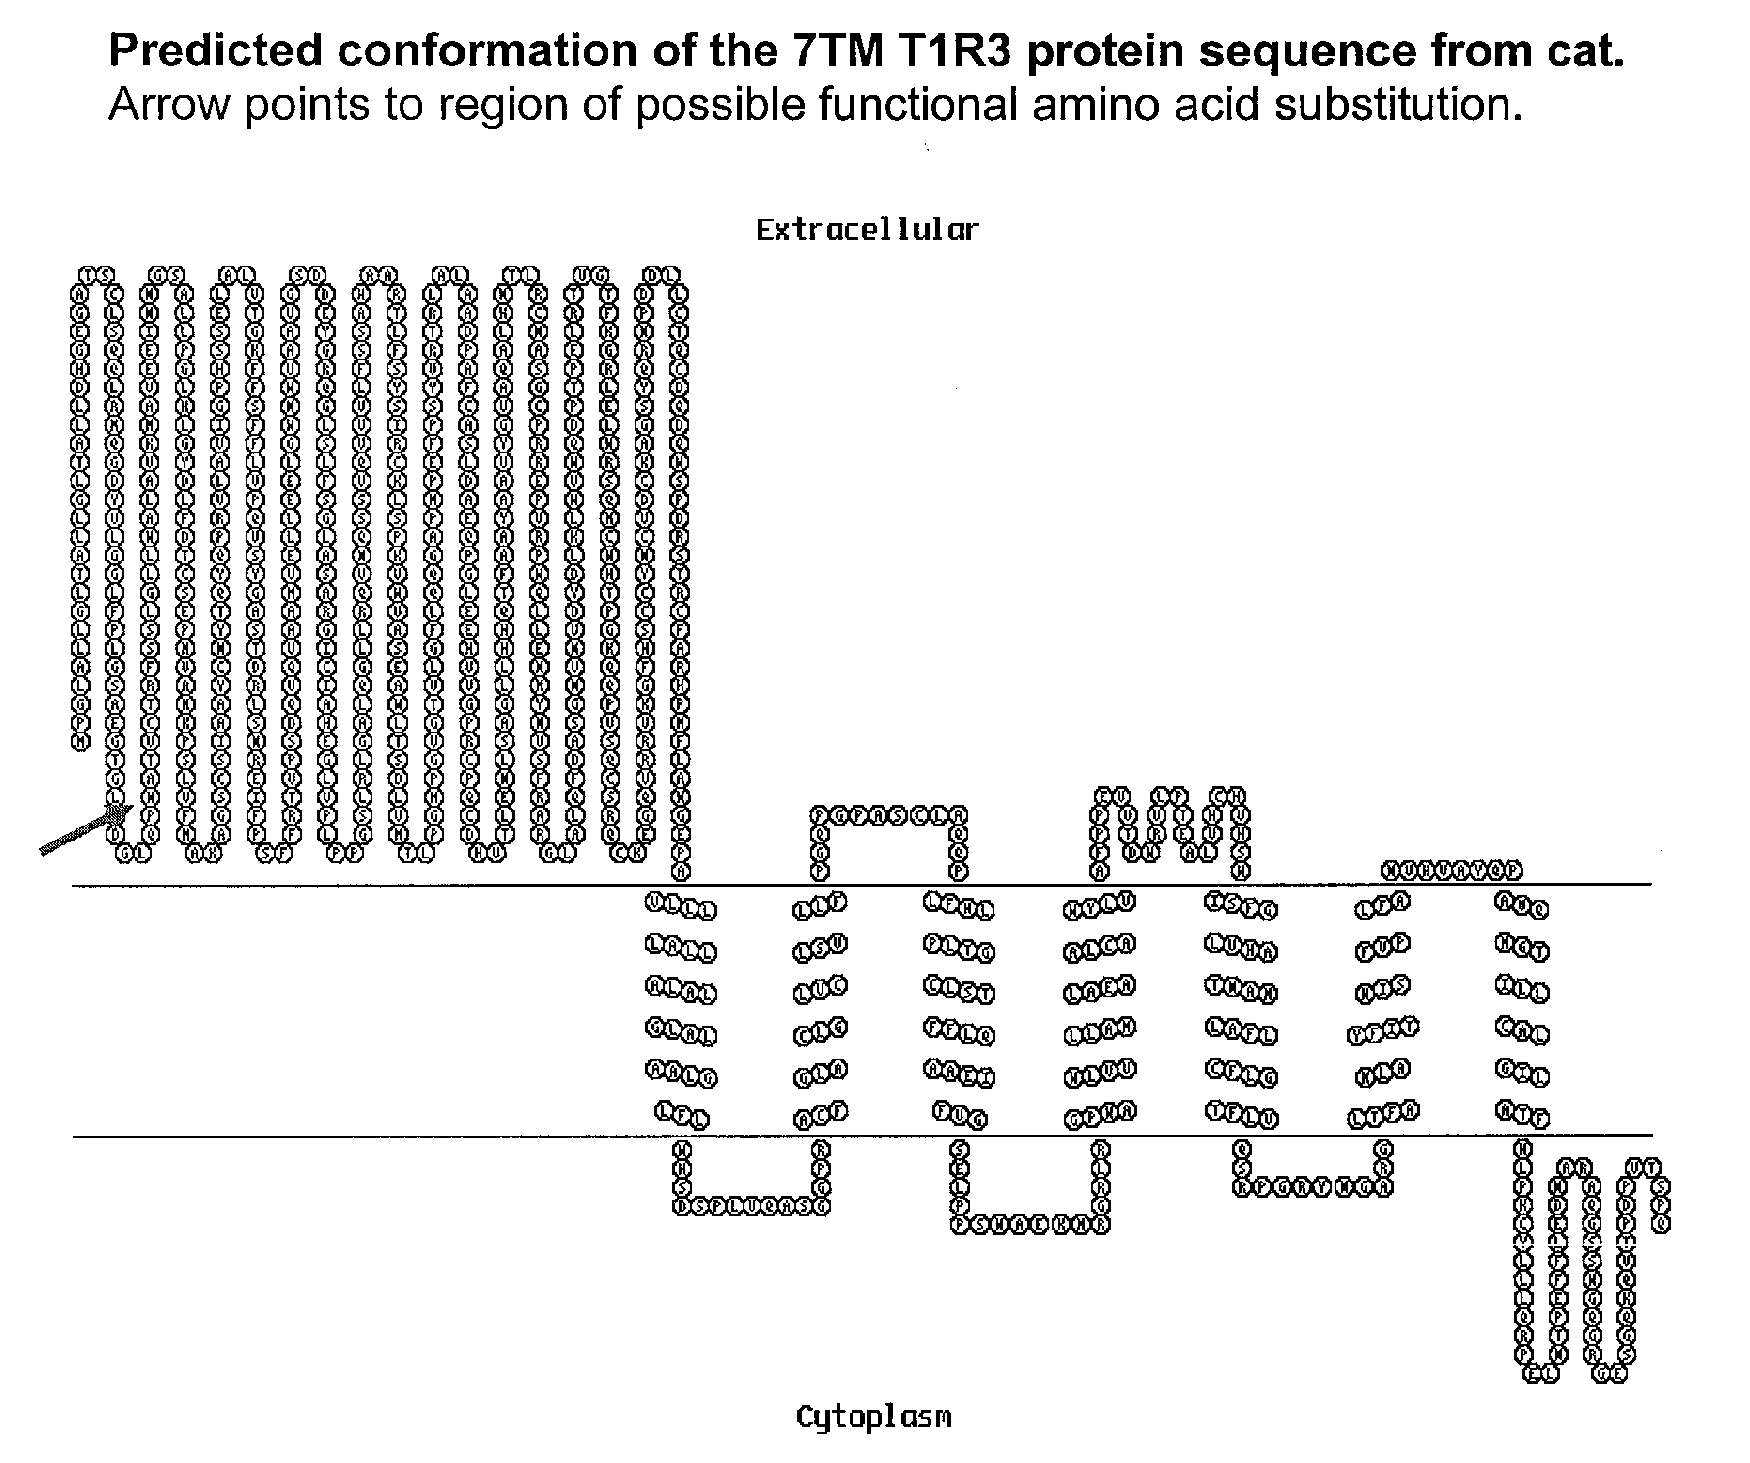 Taste Receptors Of The T1R Family From Domestic Cat